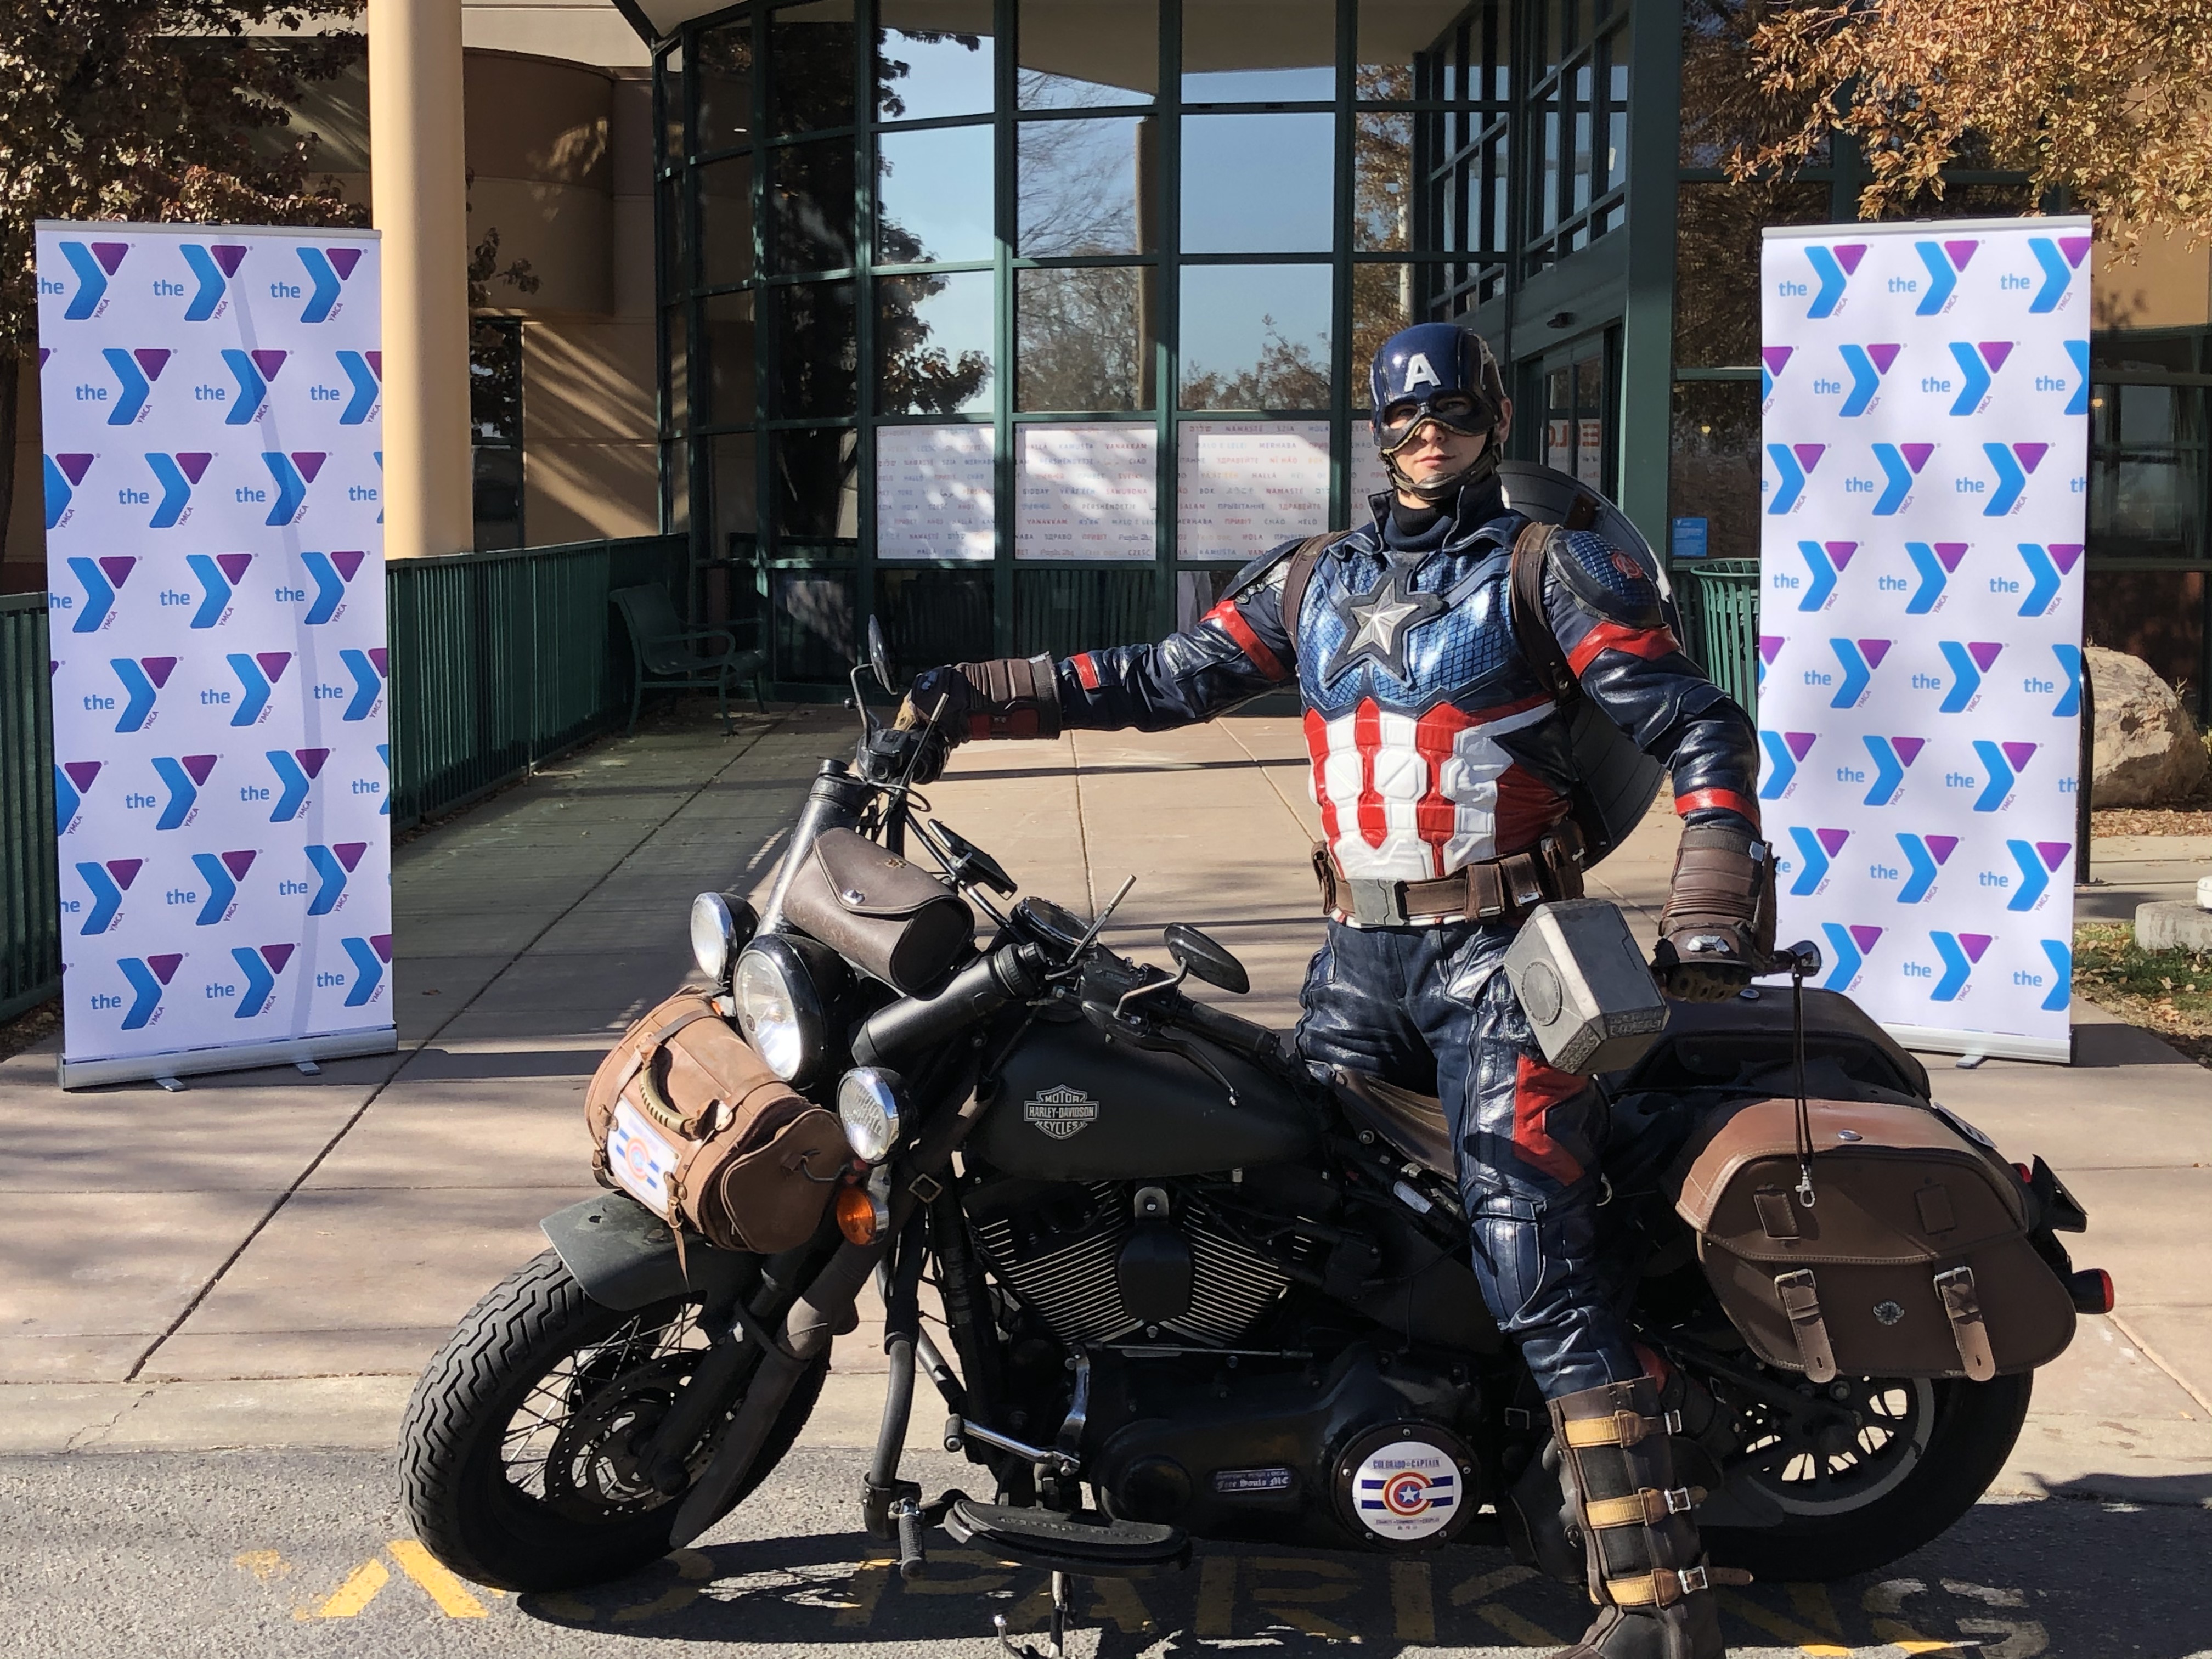 YMCA of Northern Colorado on X: "Have you noticed any super special  visitors at the Y this week? We are filming videos for a partnership with  @SuperheroIRL and @ymca, featuring superheroes and